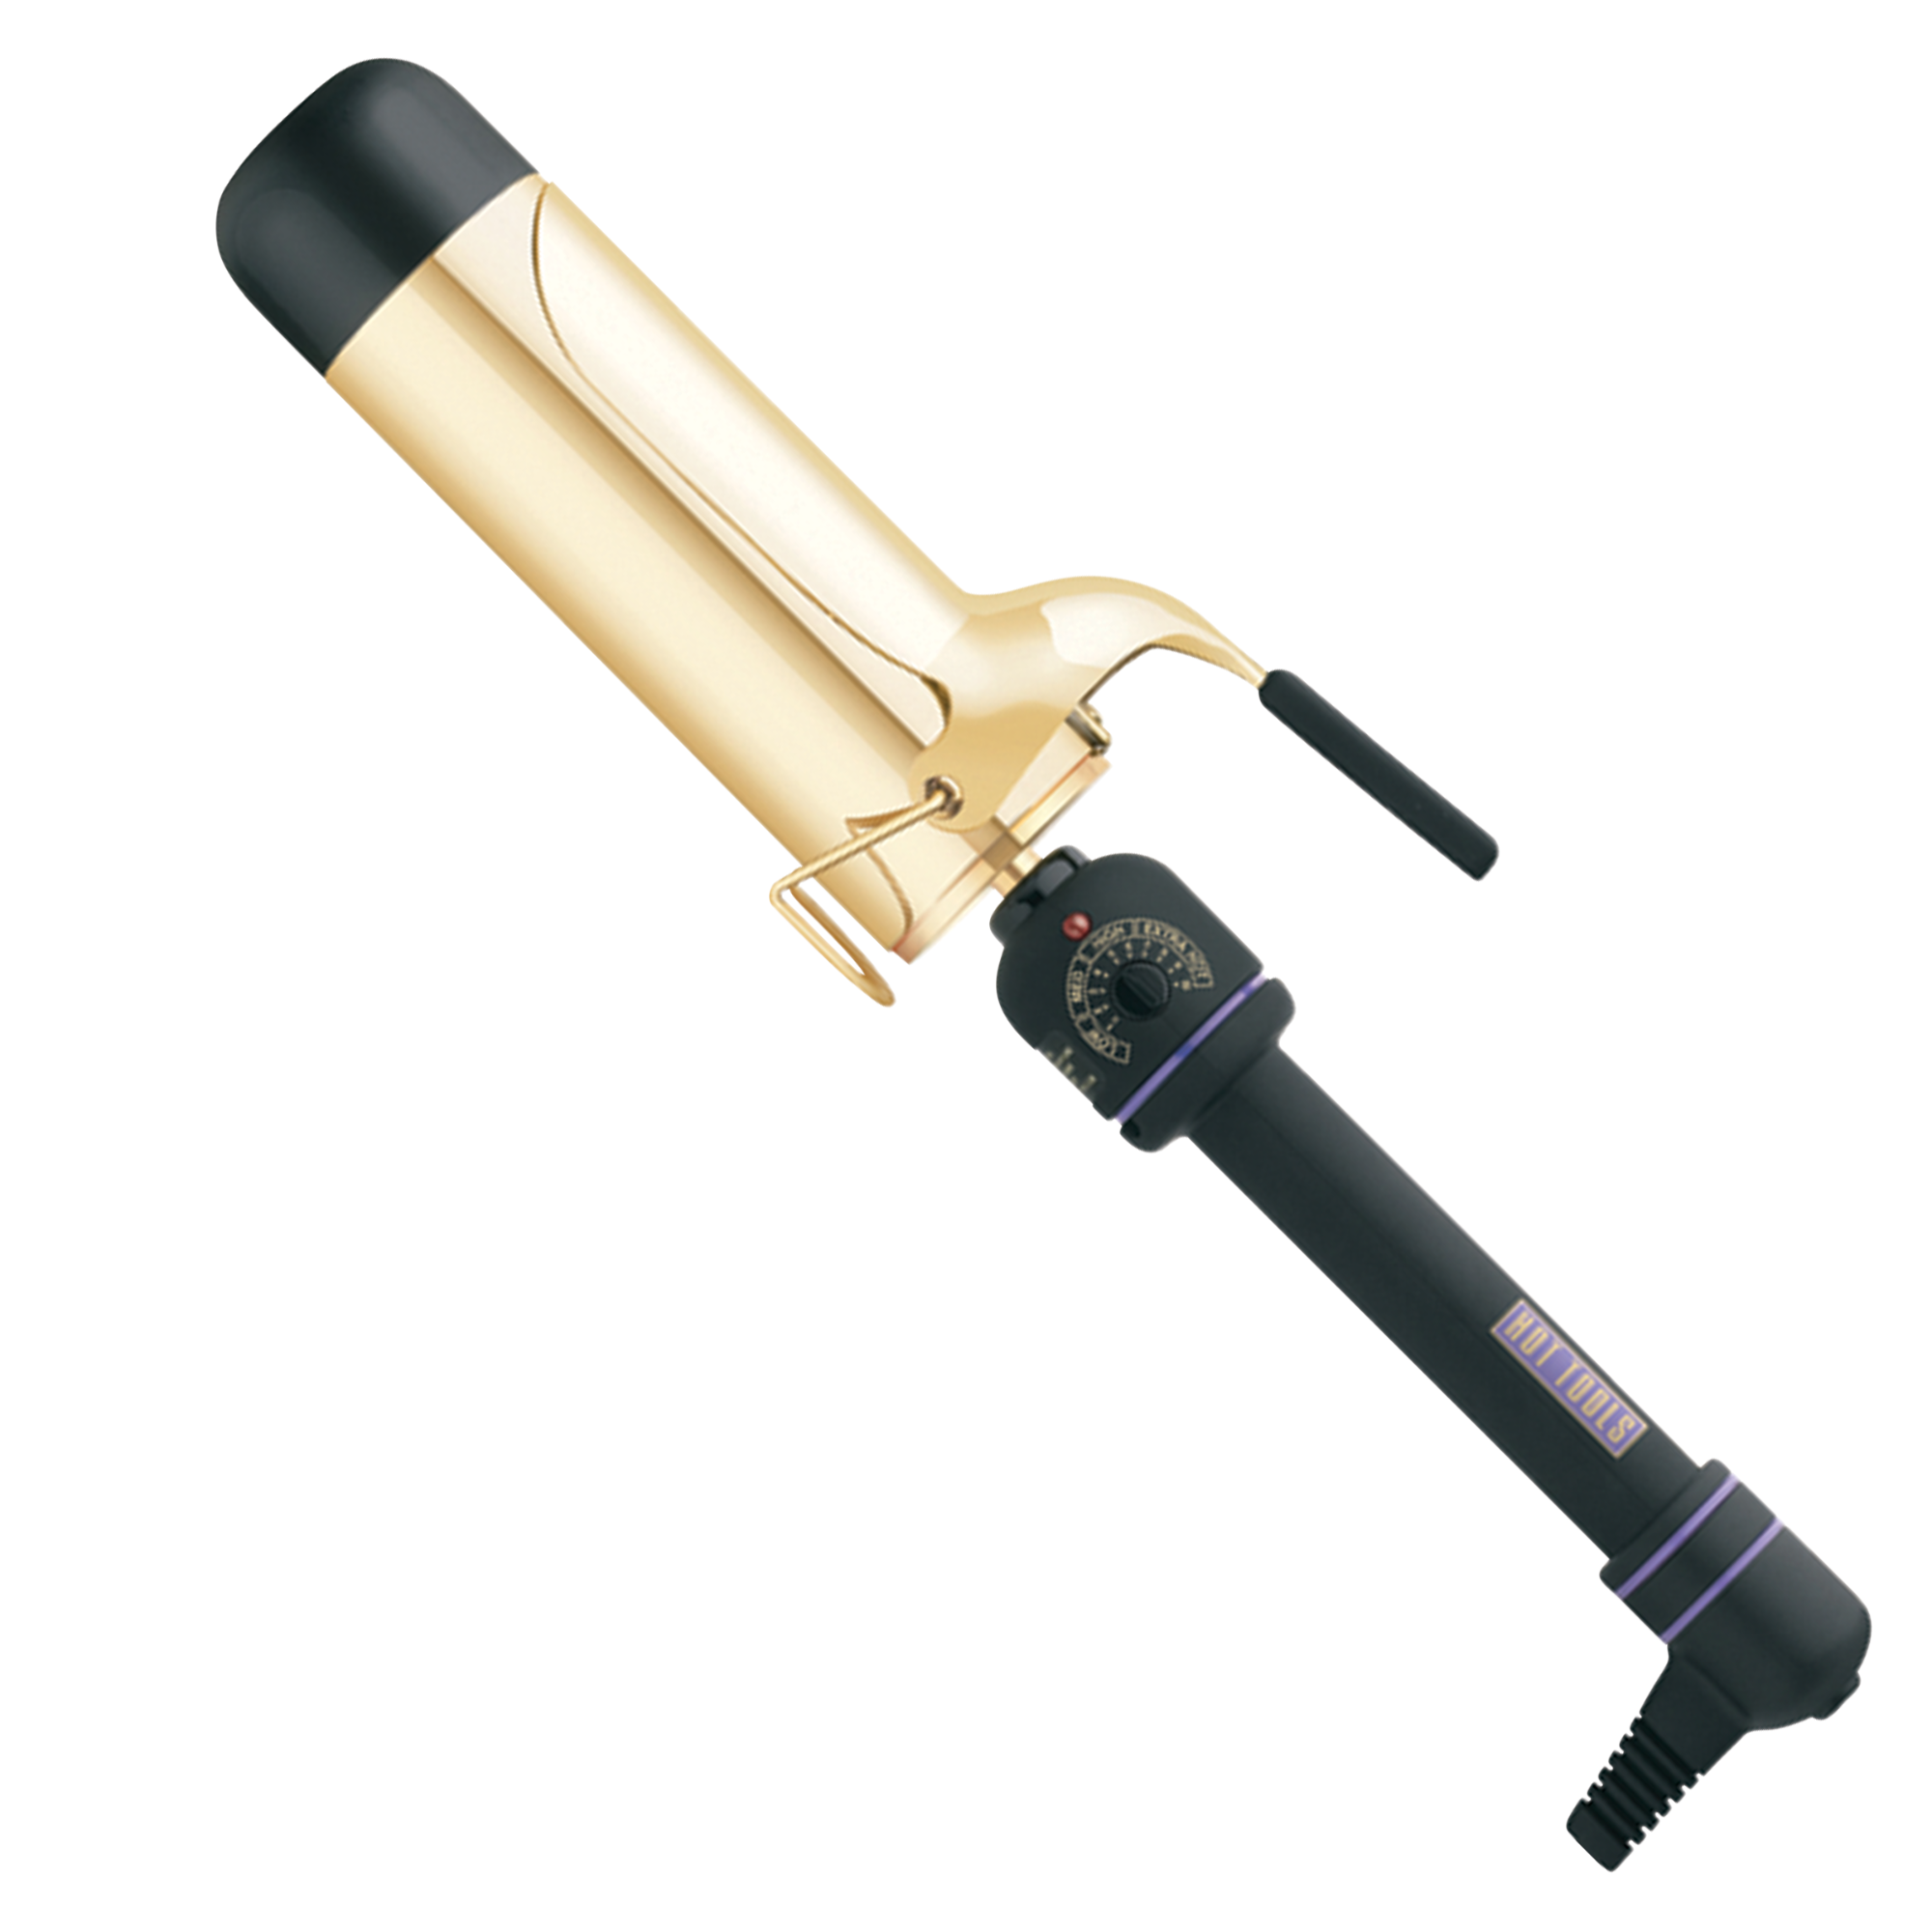 24K Gold Curling Iron/Wand - 2"